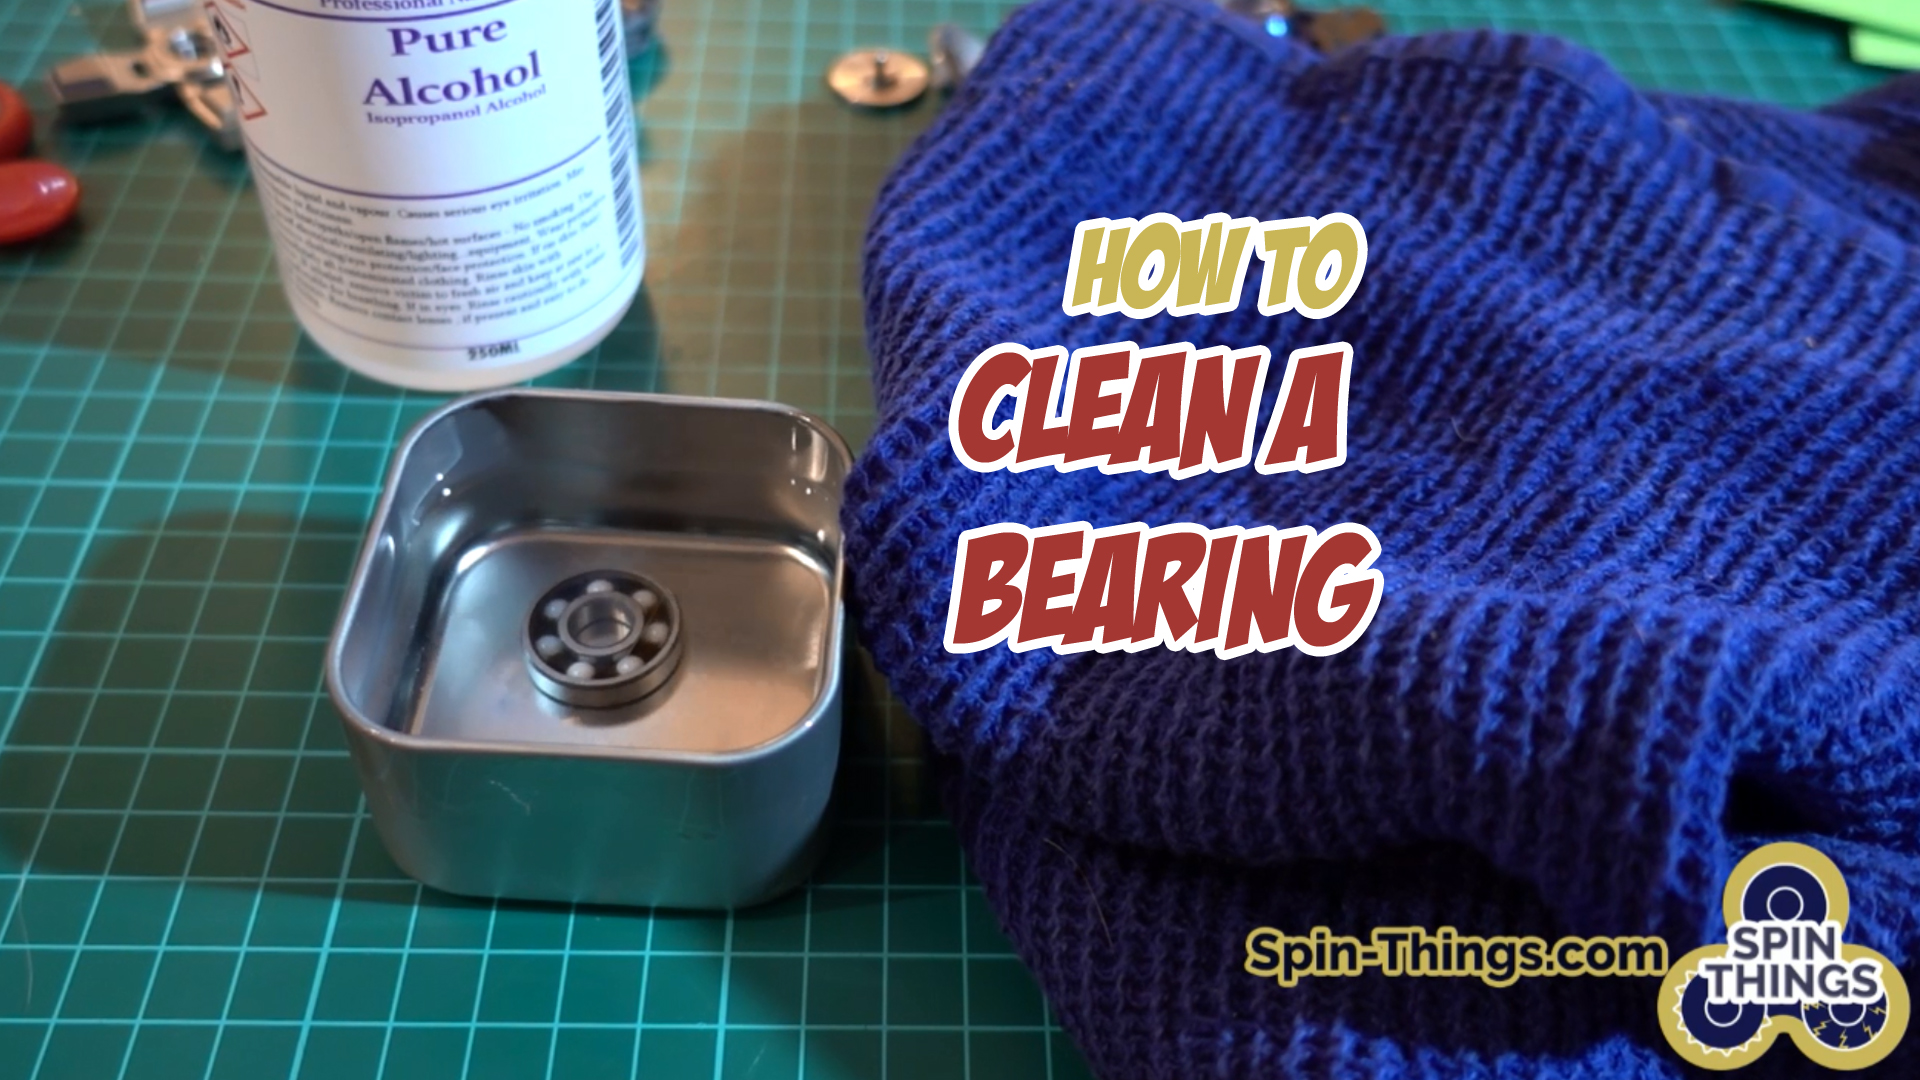 how to clean a bearing featured